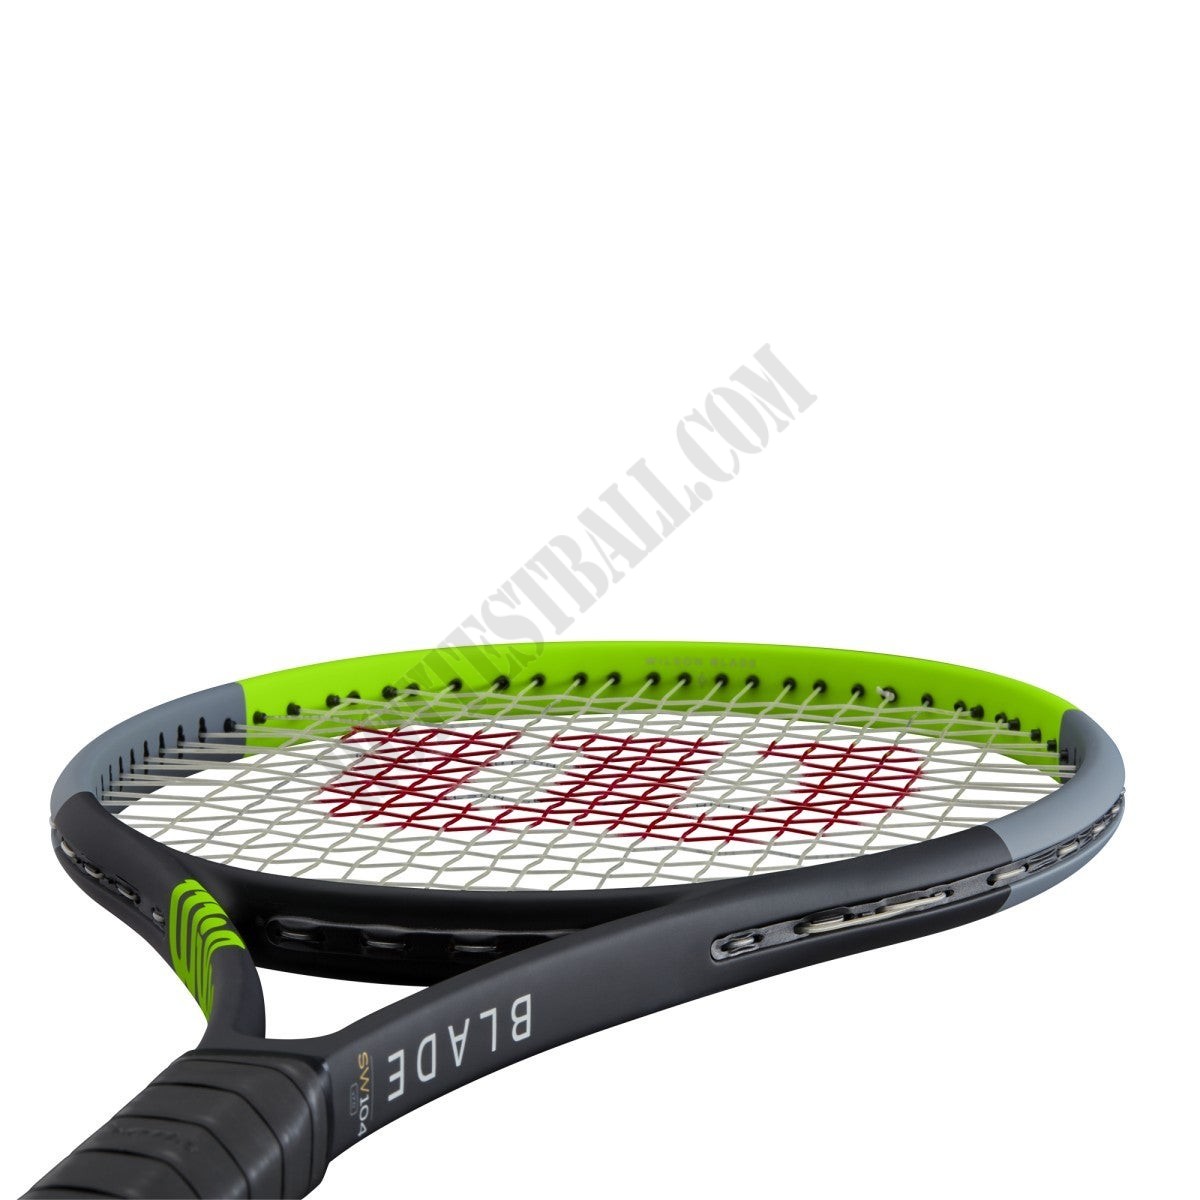 Blade SW104 V7 Autograph Countervail Tennis Racket - Wilson Discount Store - -4